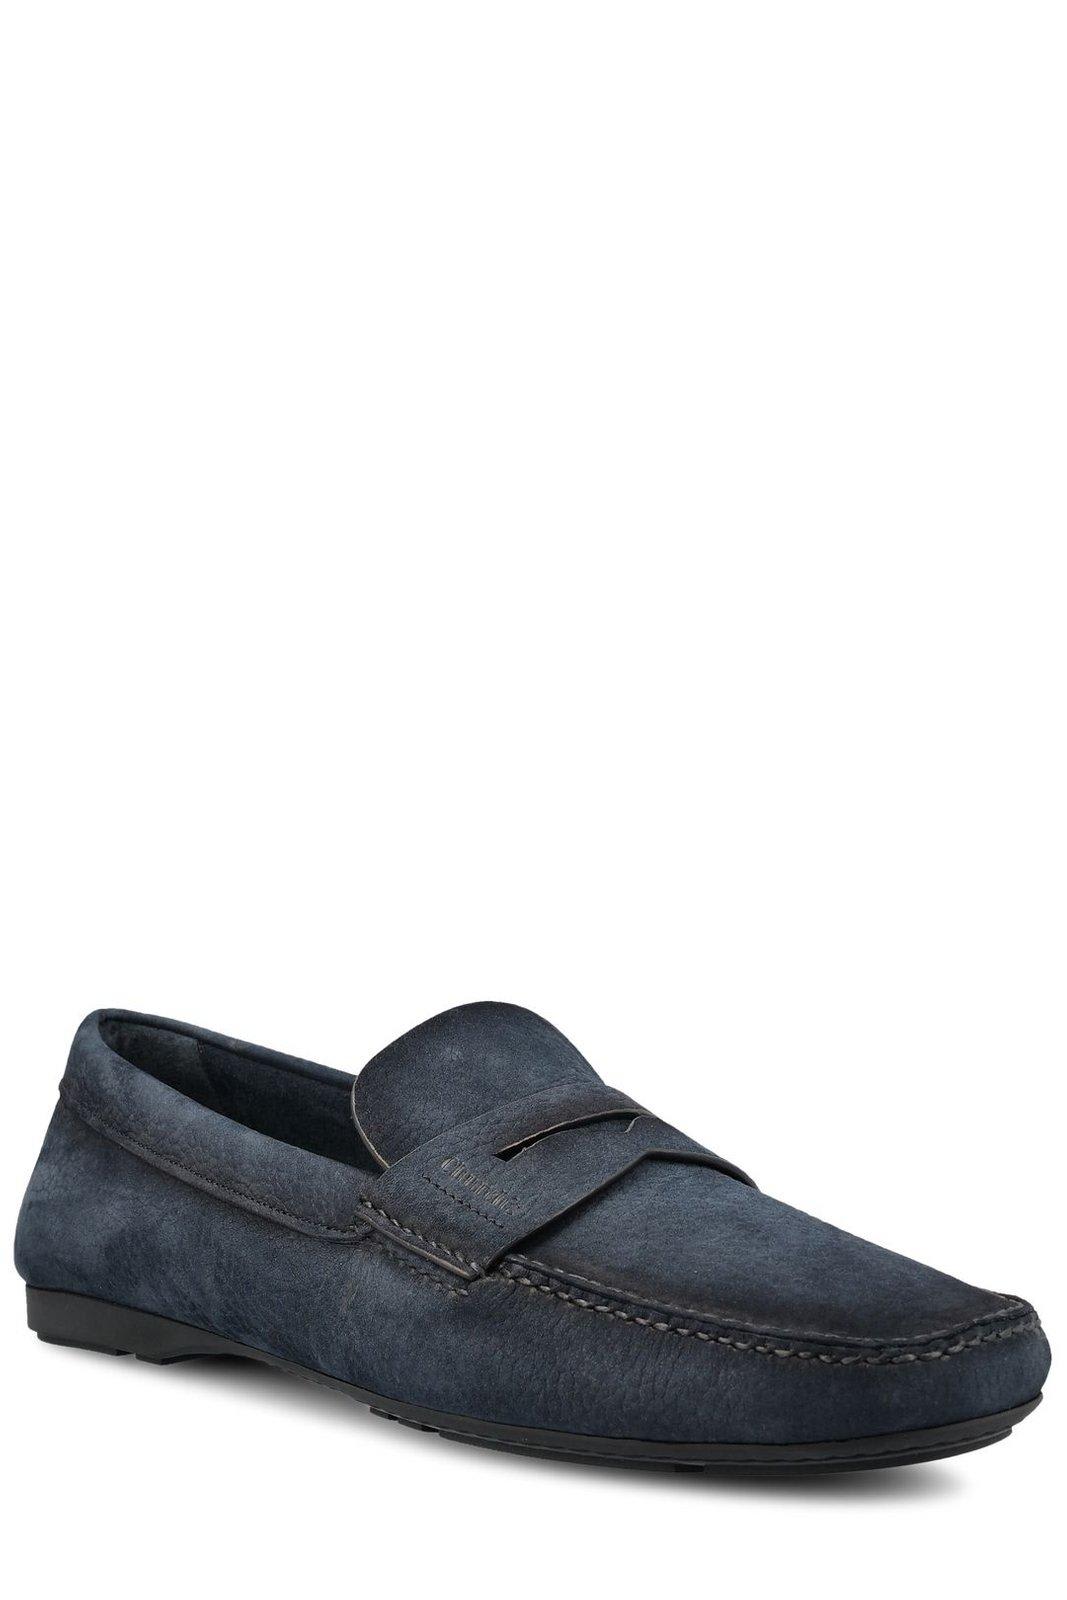 Shop Church's Round-toe Slip-on Loafers In Abm Navy